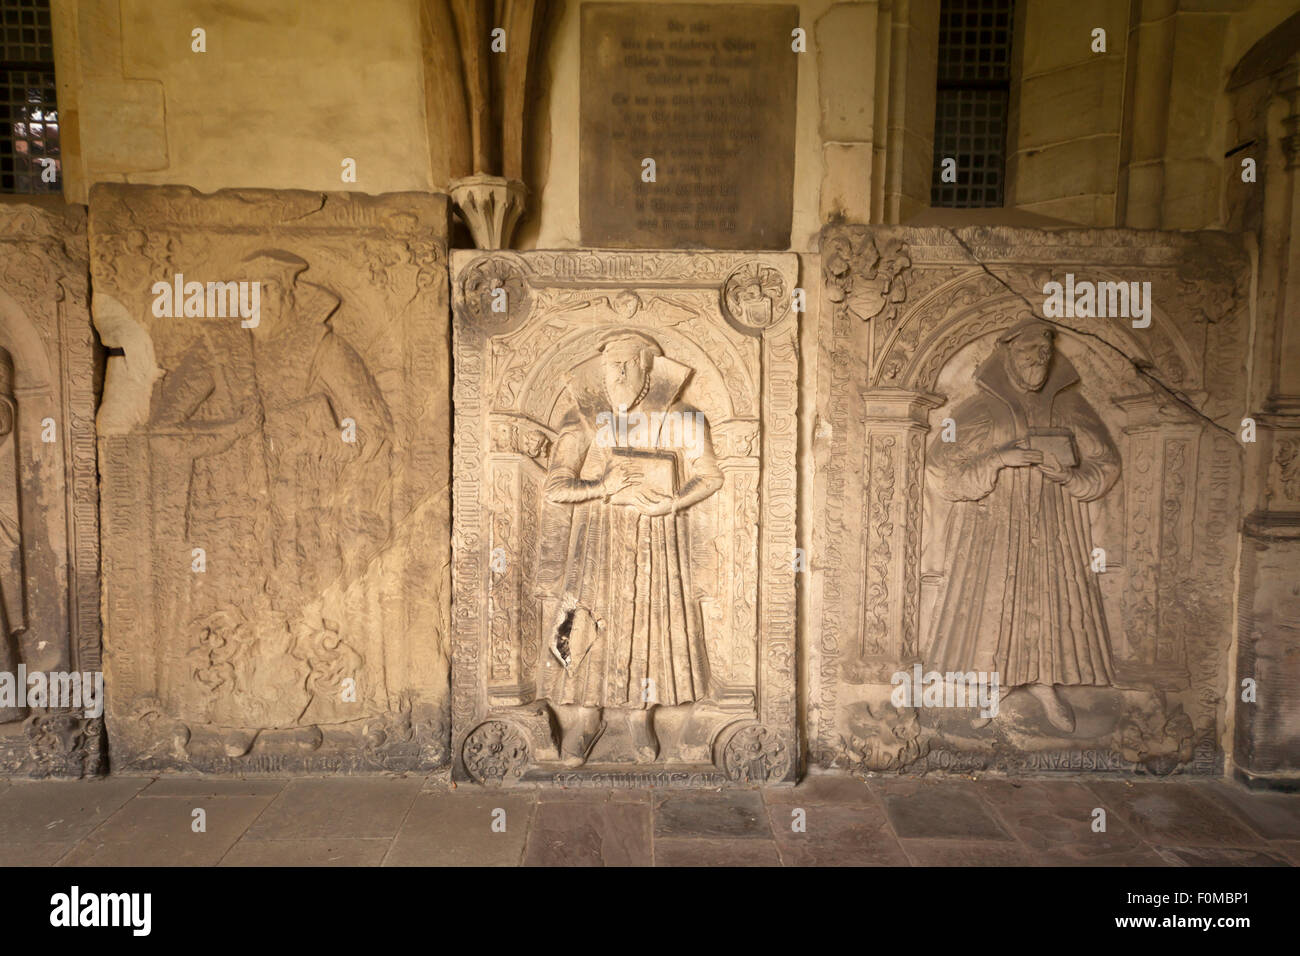 stone relief at the cloister of the Magdeburg Cathedral, Magdeburg, Saxony- Anhalt, Germany Stock Photo